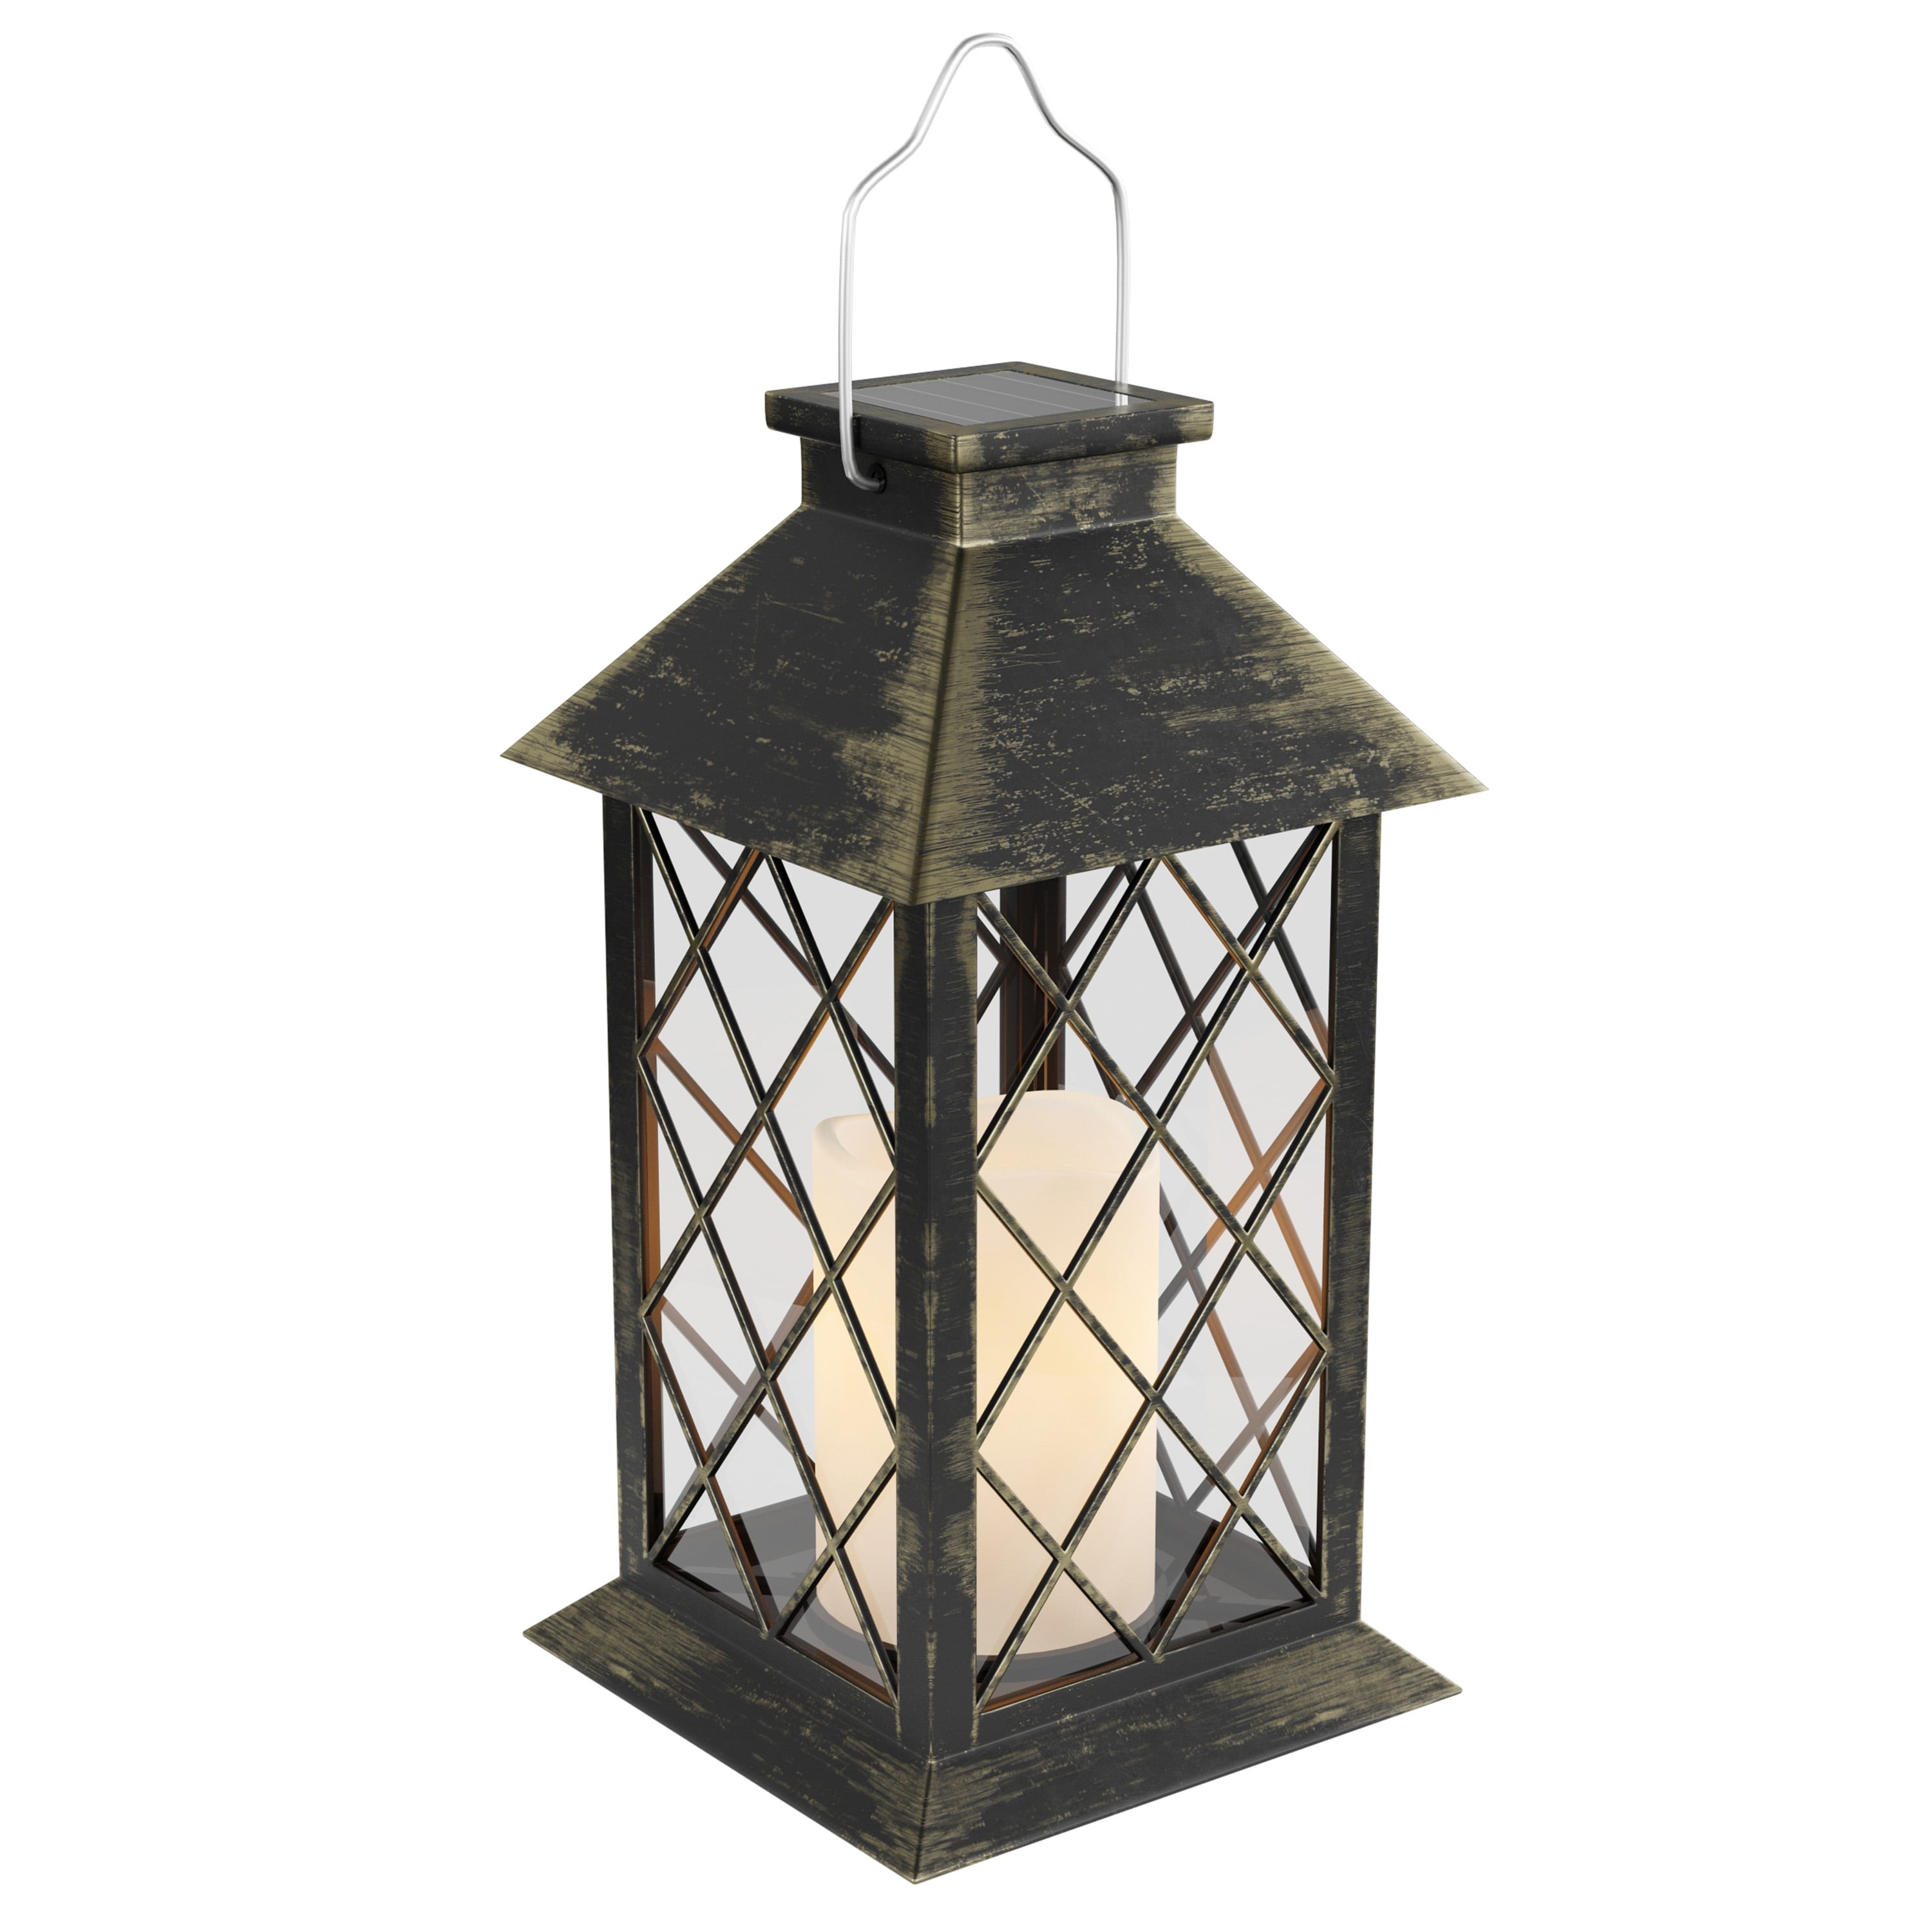 Gentry 3 Candle Lantern by Sunjoy 3LED Candles Rechargeable All-weather outdoor 